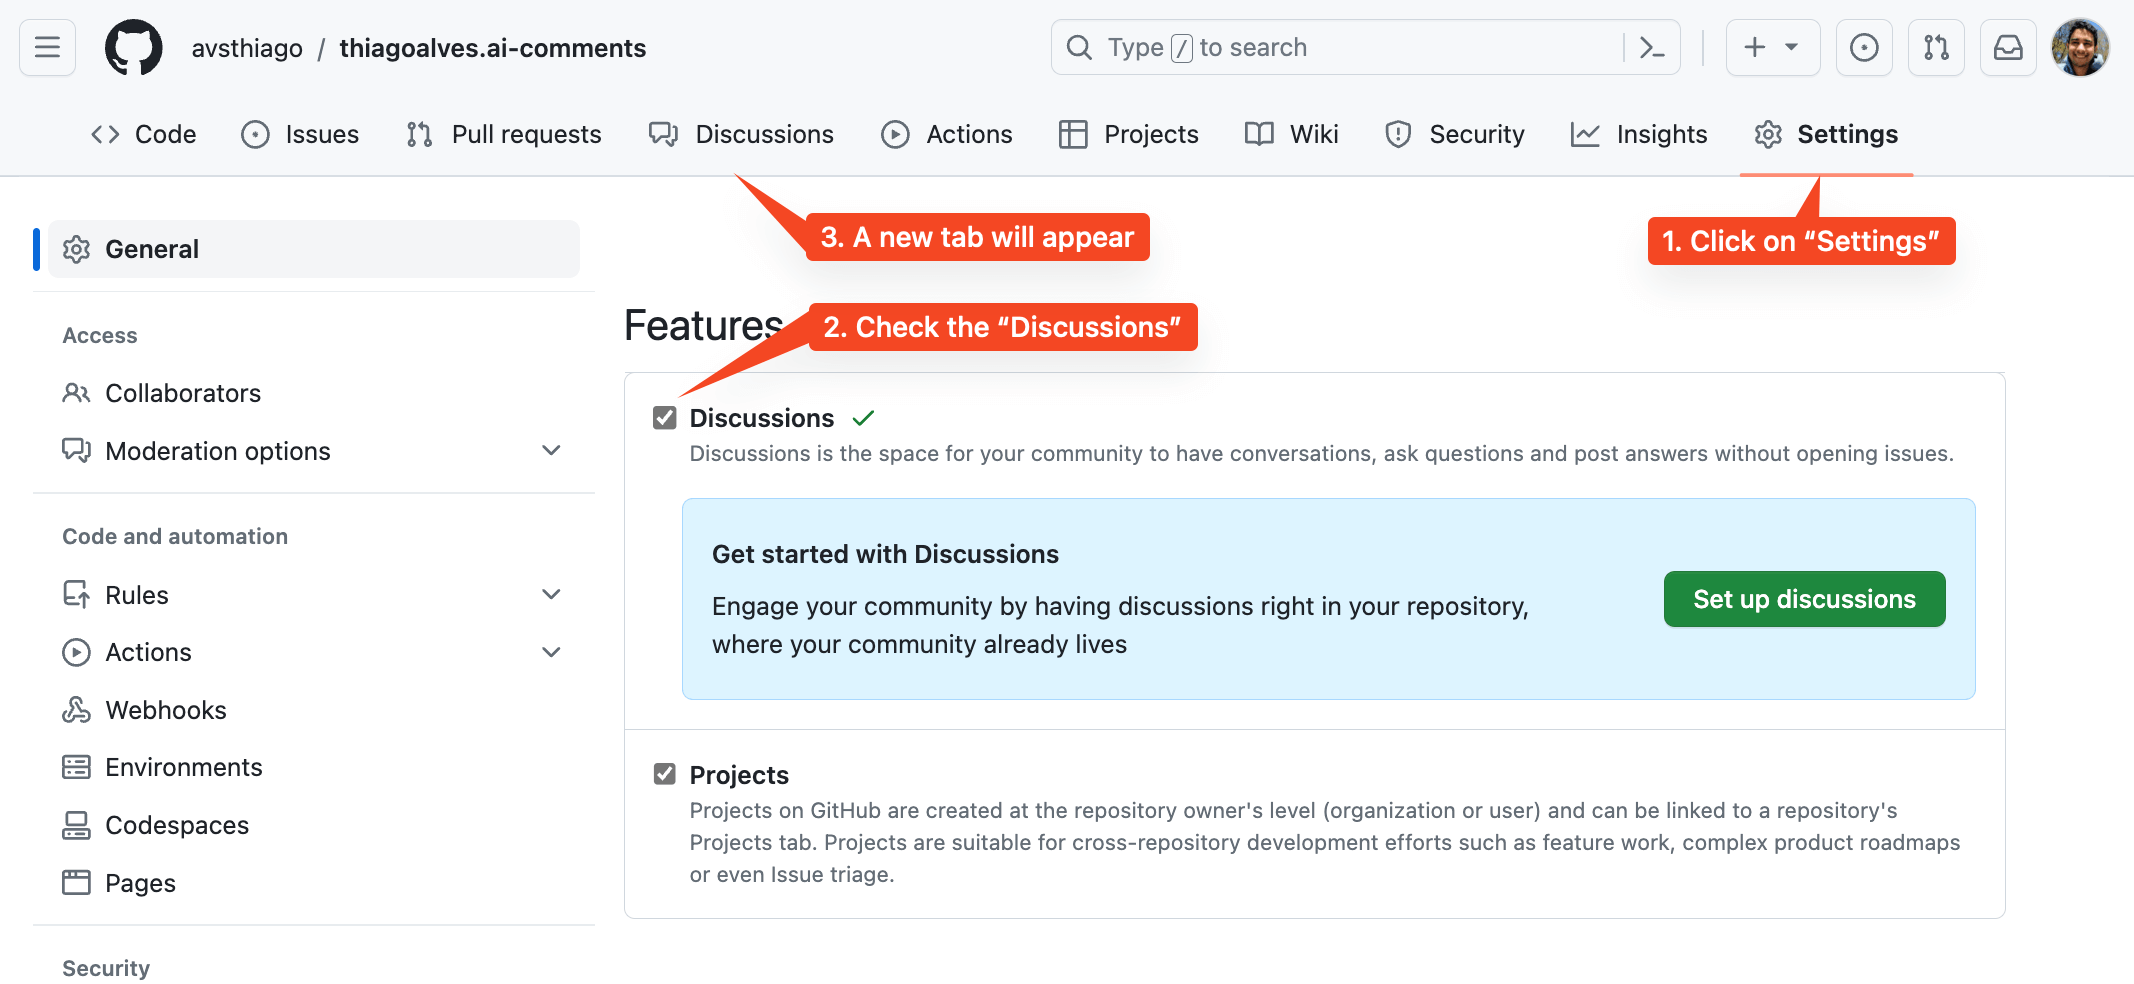 Activate the discussions feature.